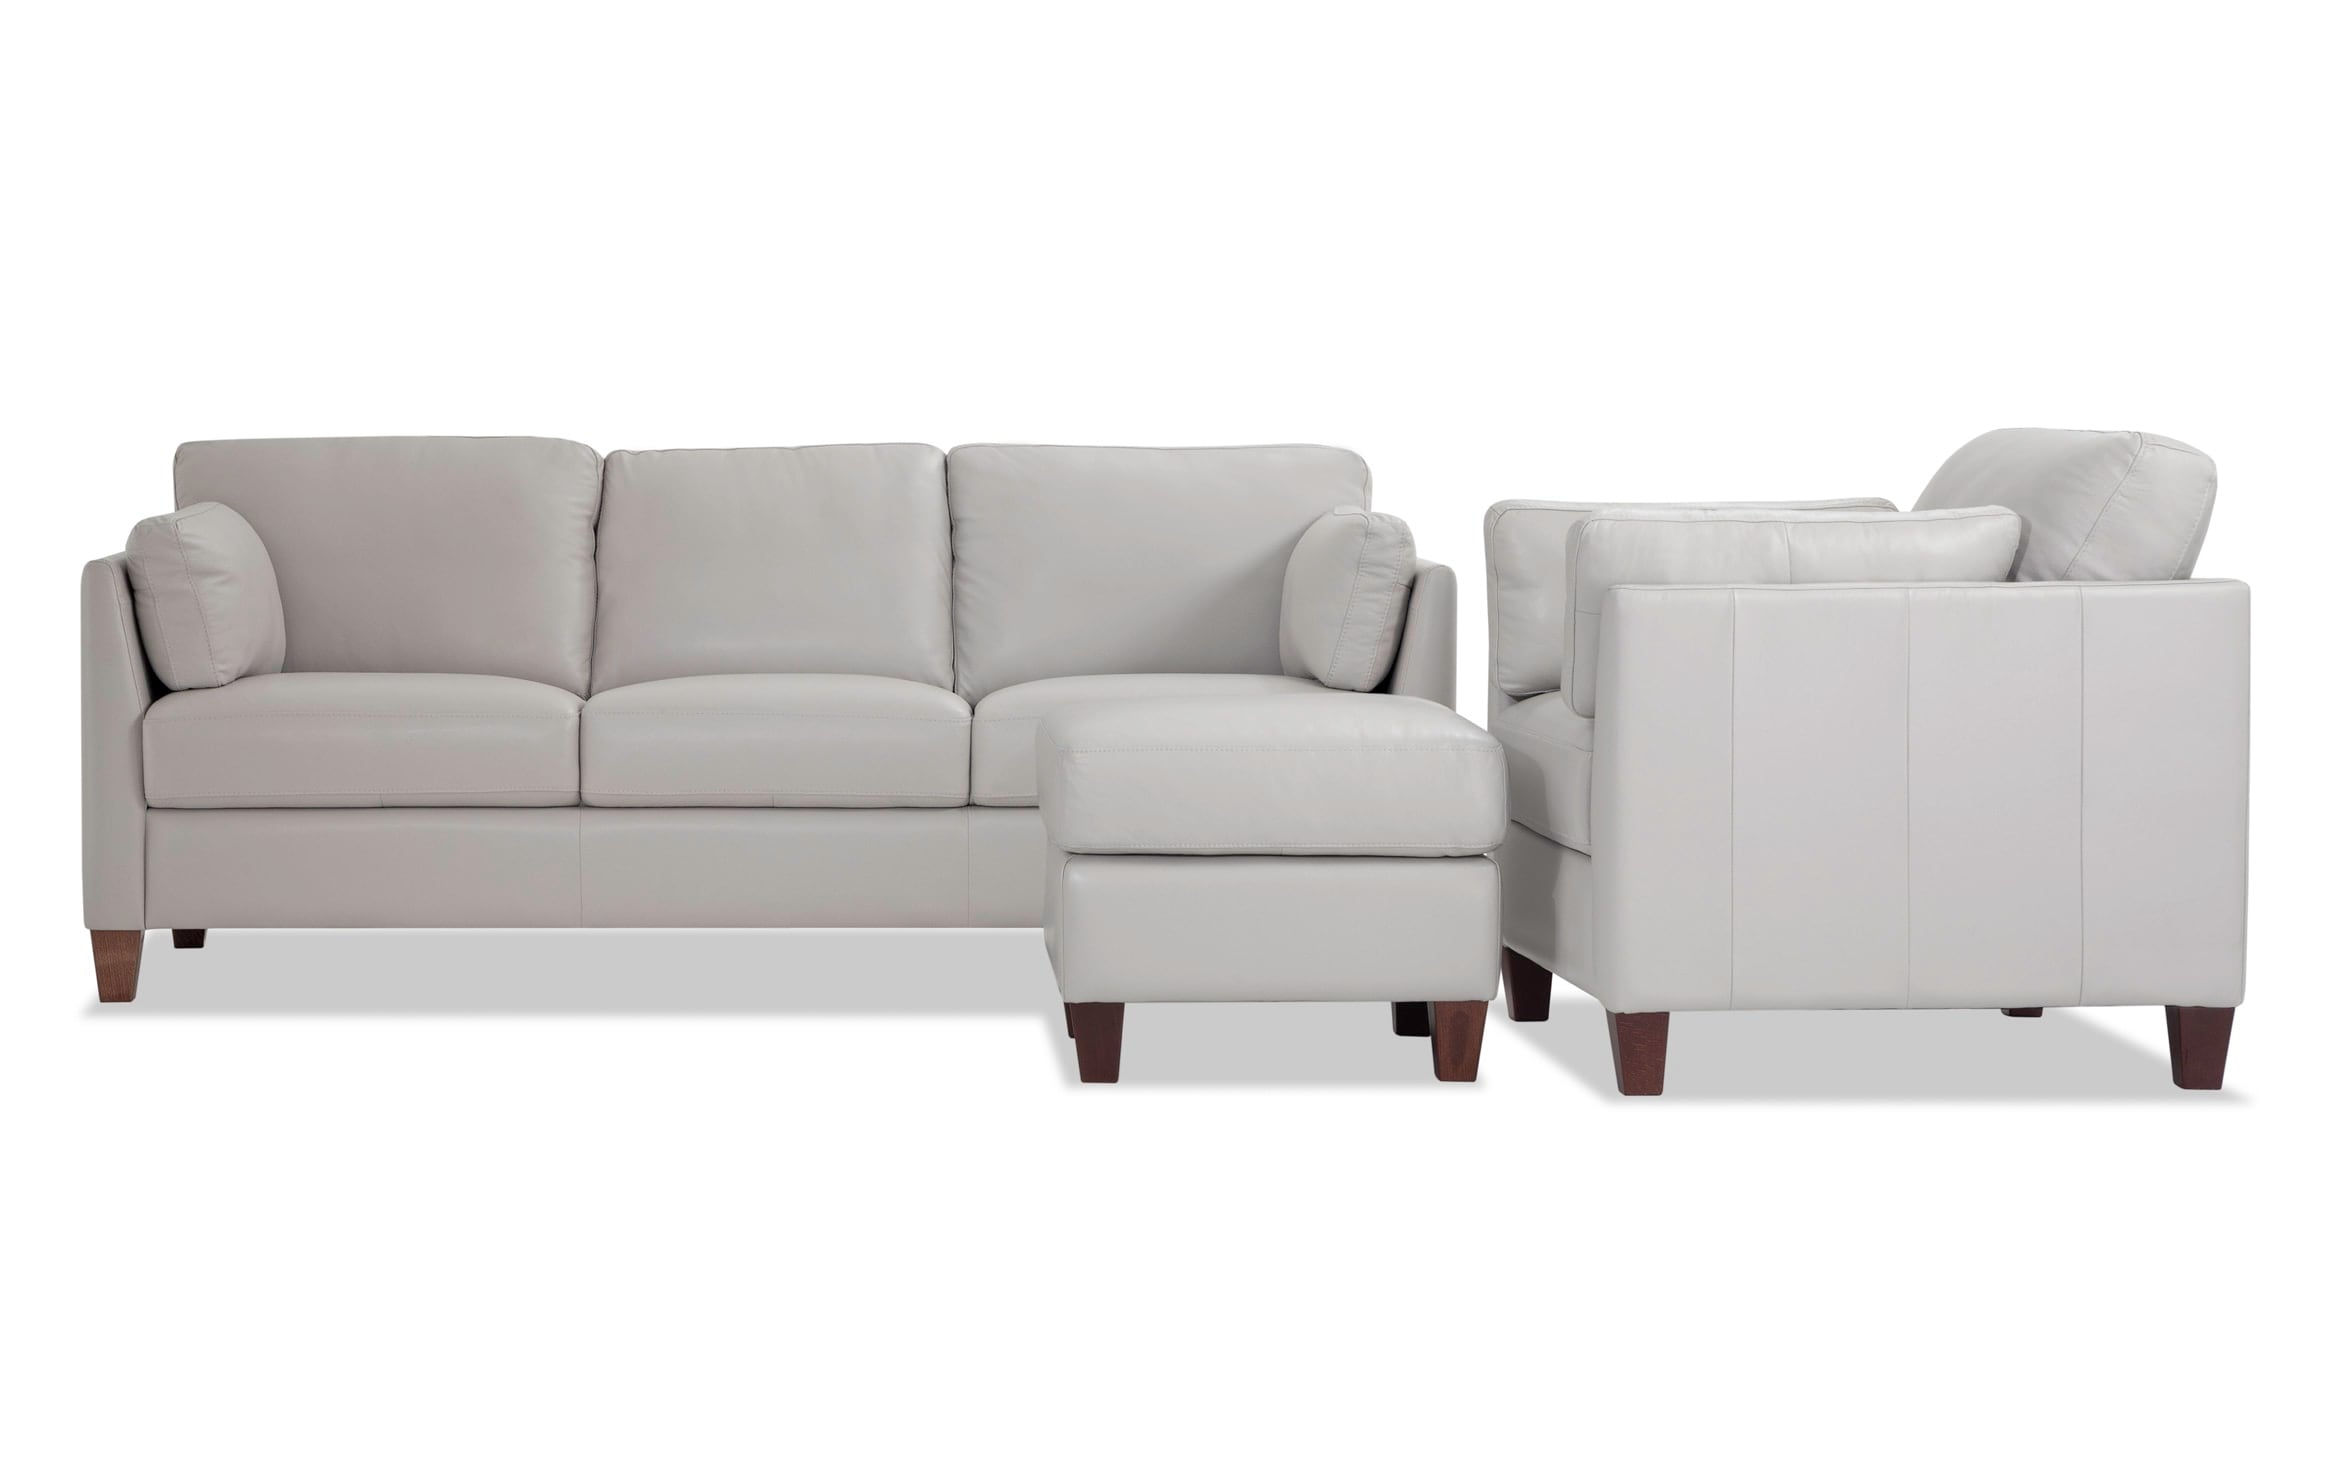 Queen Sofa Chair Kinsley 4 Piece Living Room Set With